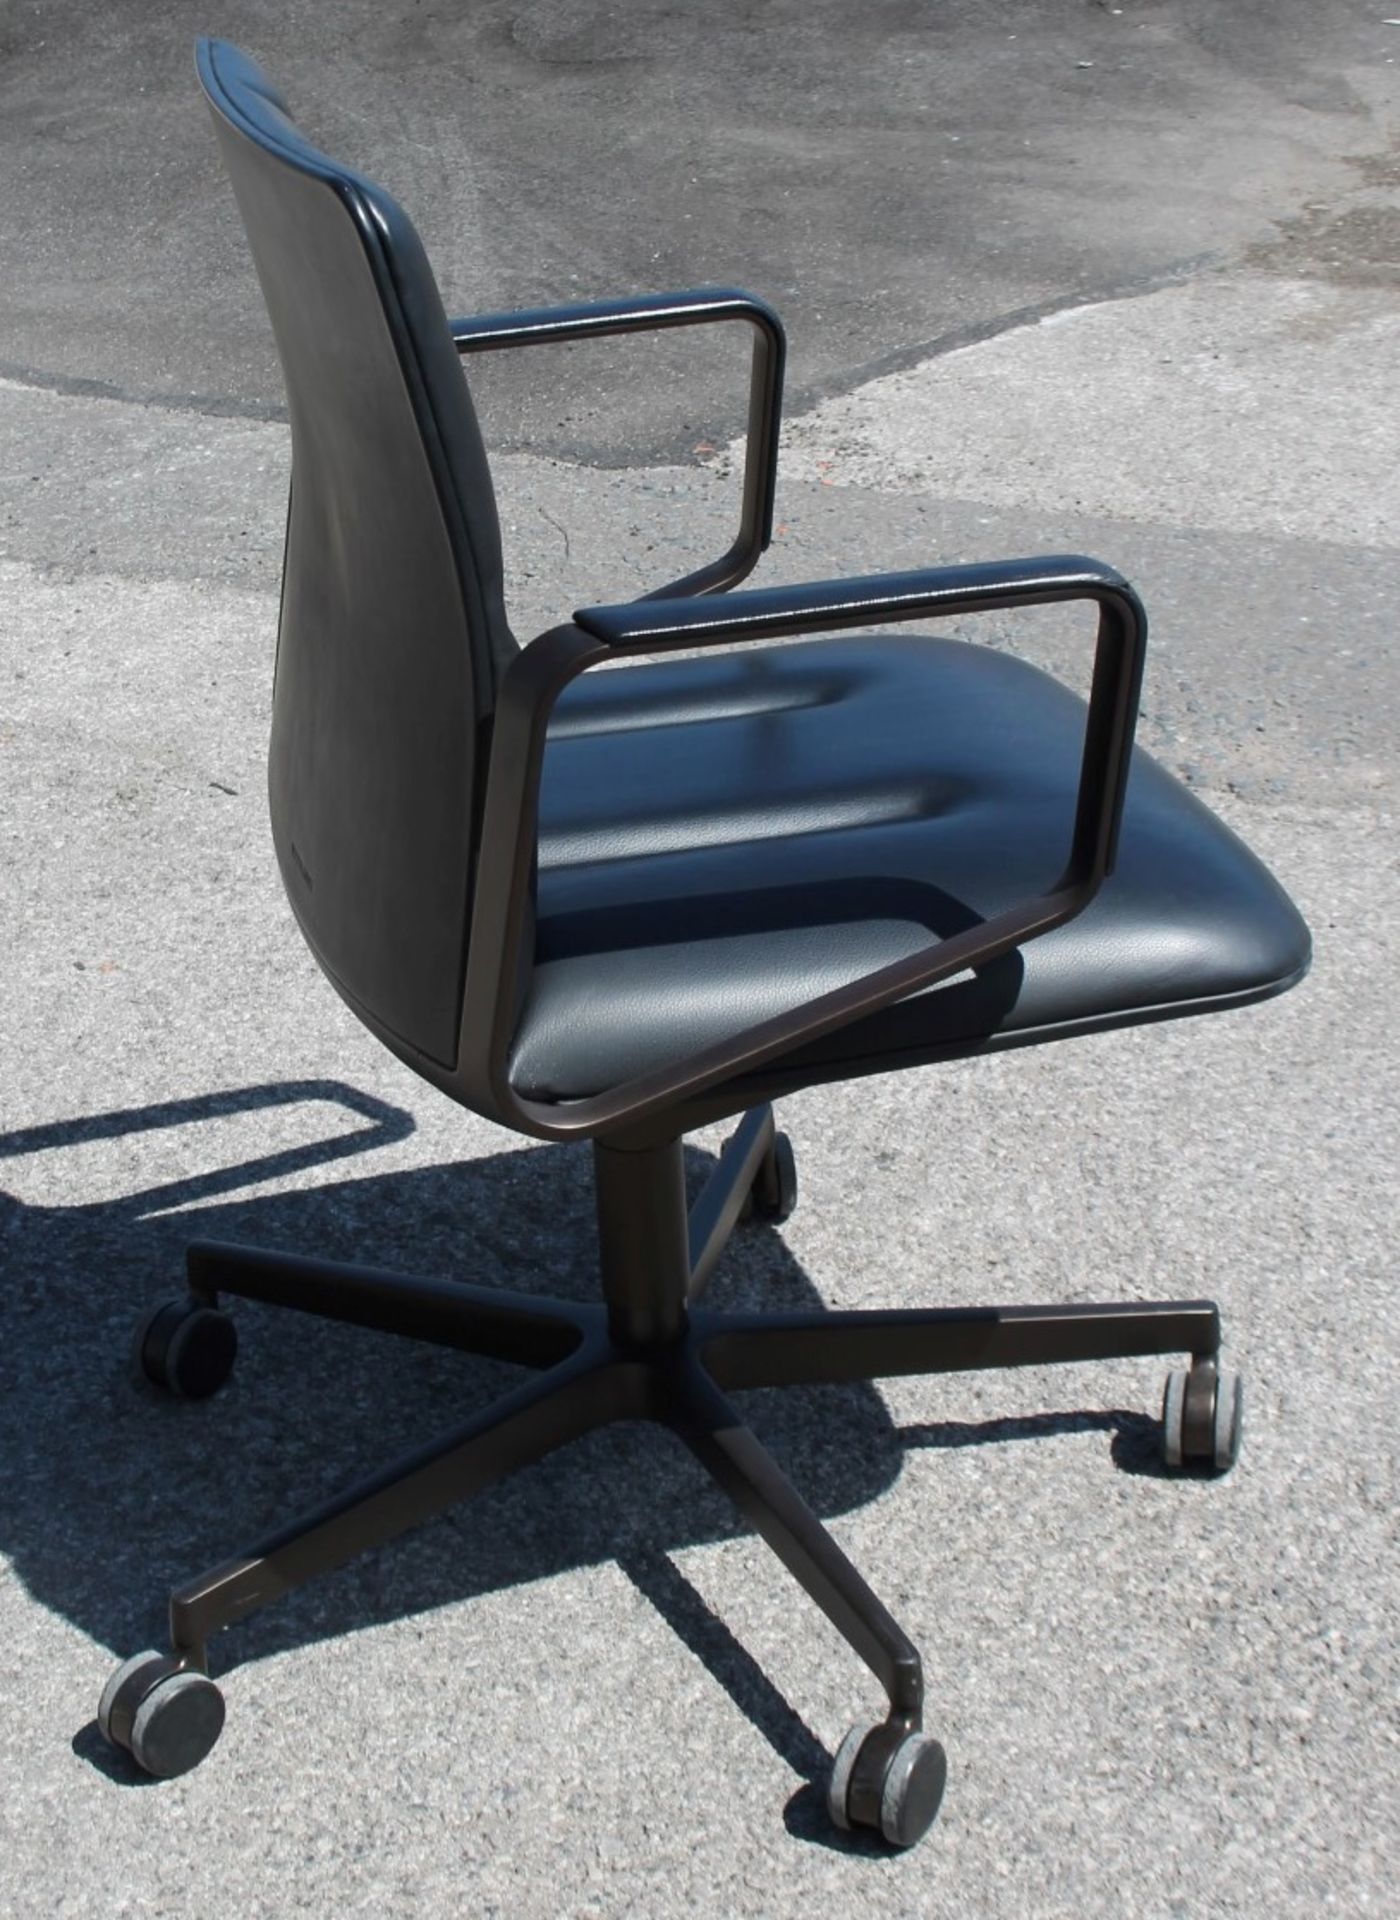 1 x WALTER KNOLL 'Leadchair' Executive Meeting Chair In Genuine Leather - Original RRP £4,250 - - Image 7 of 8